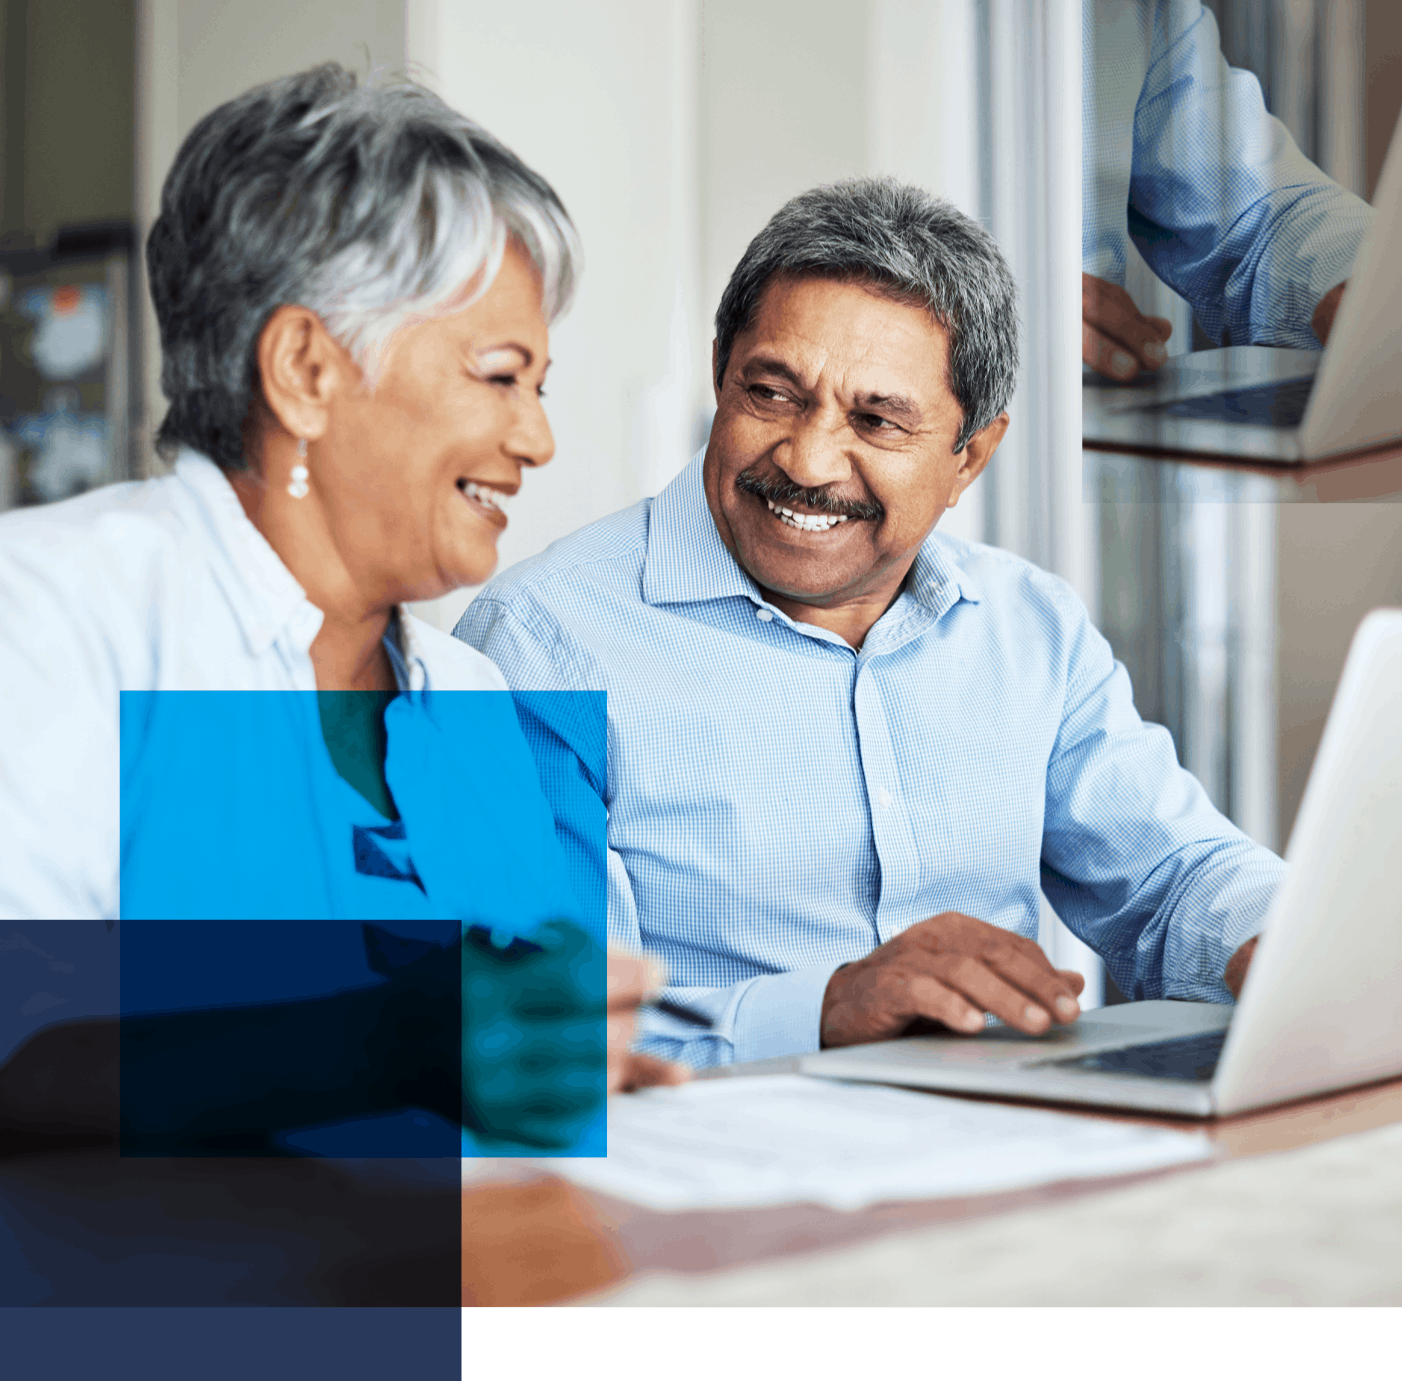 Image of an older couple sitting in front of a laptop smiling at each other. Related to: improving efficacy, pbgc efficacy, pbgc user experience, updating pbgc